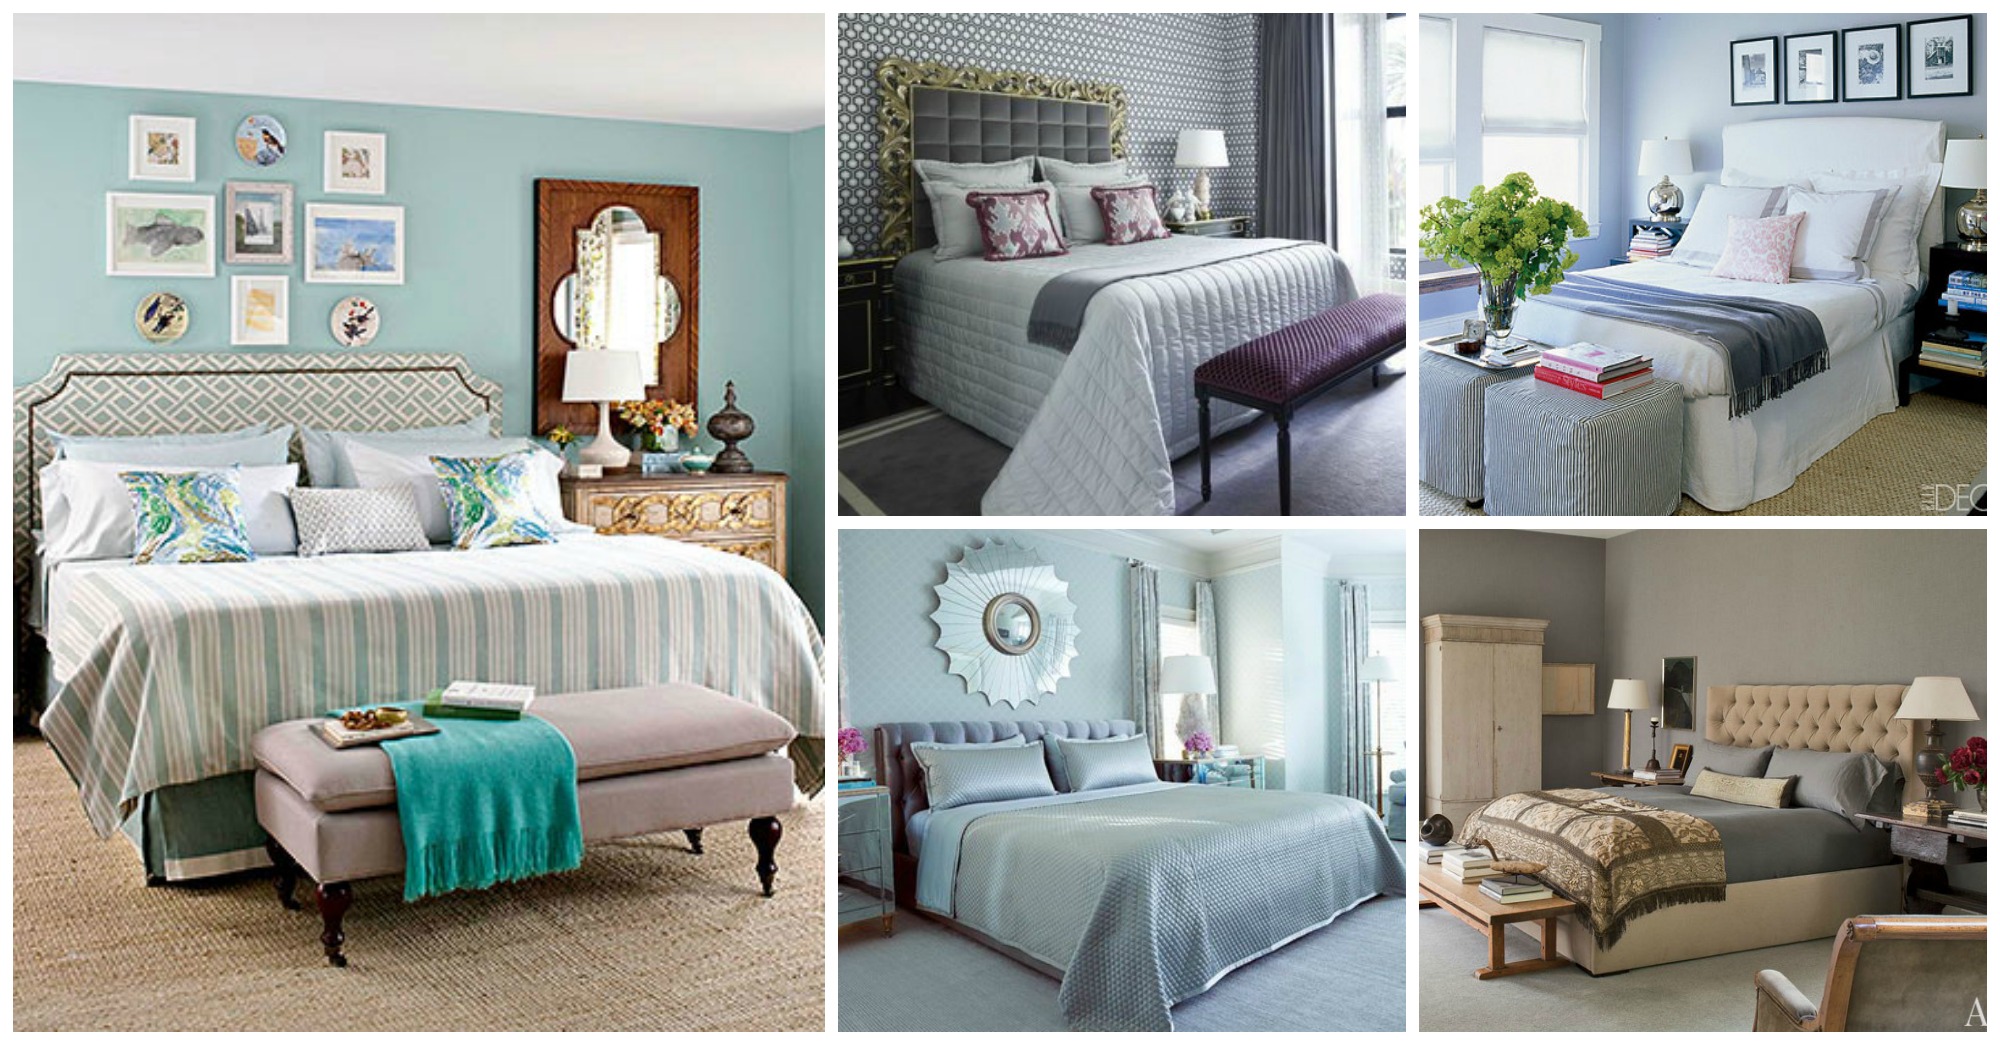 11 Comfortable Bedrooms for Every Taste - Top Dreamer